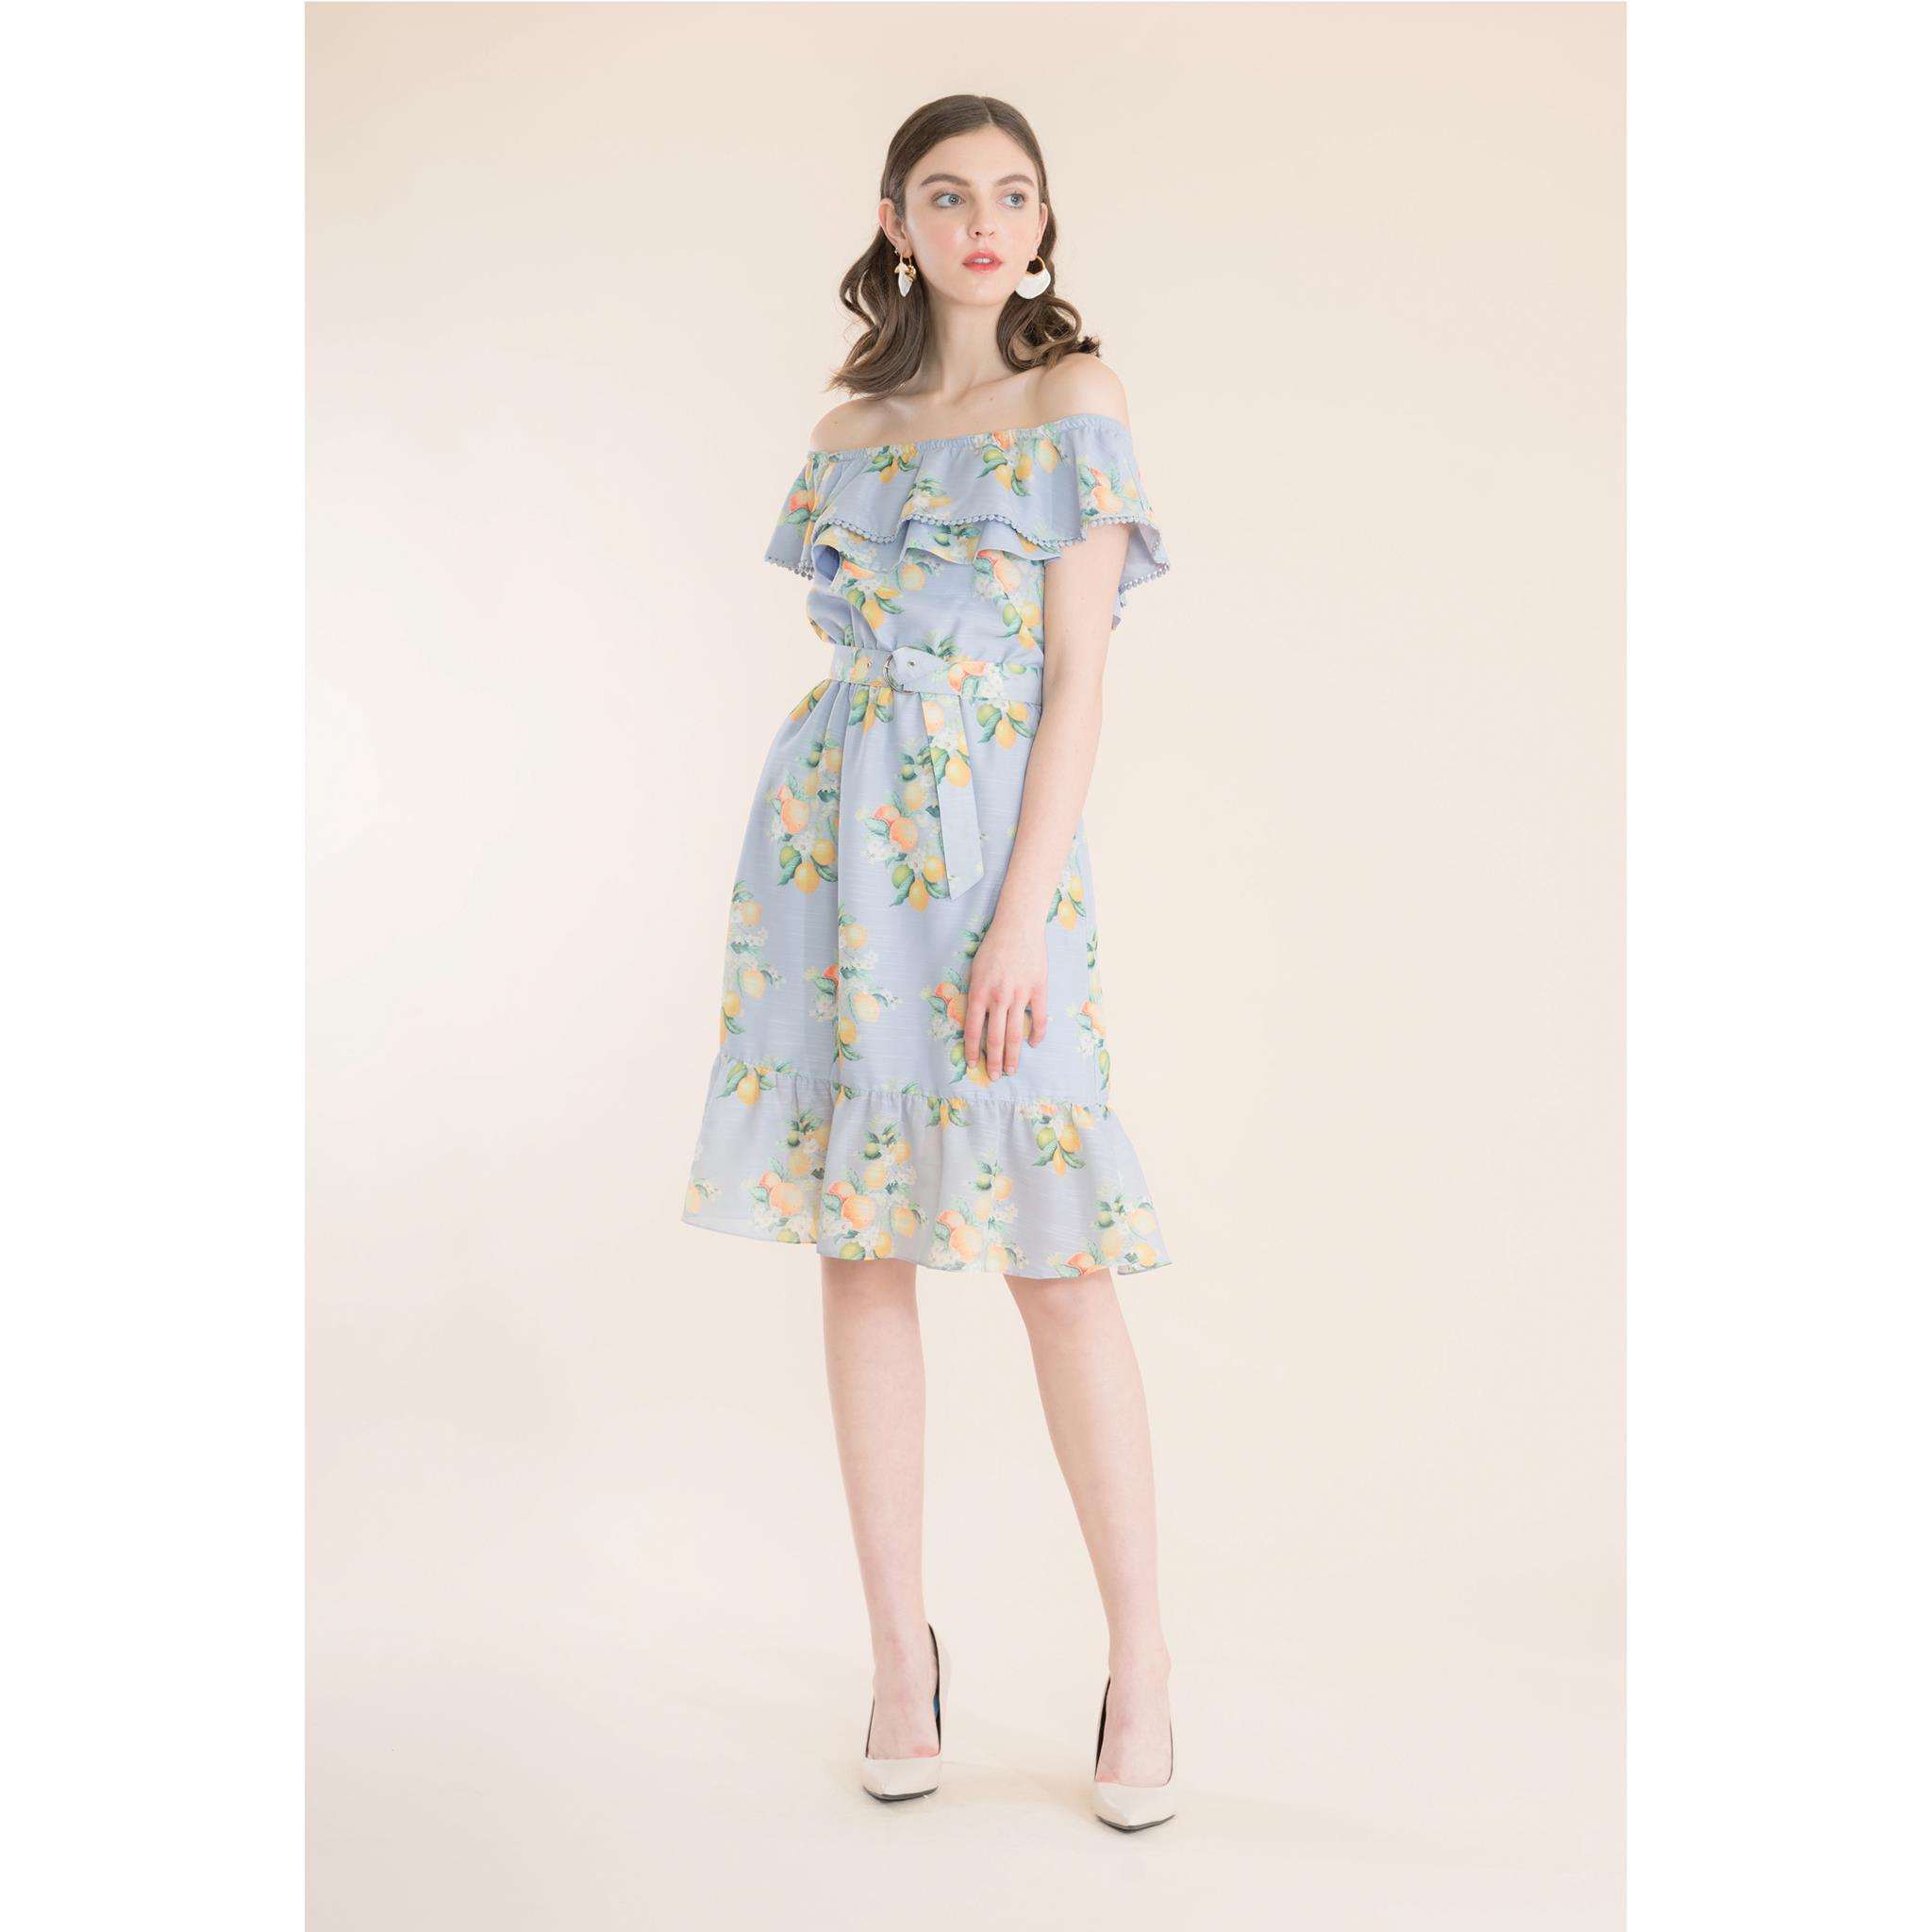 Dress for a sunny state-of mind with this season. Dress - DRSW503 Bread n Butter Official #lostintherosegarden #springcollection2019 #ss19...